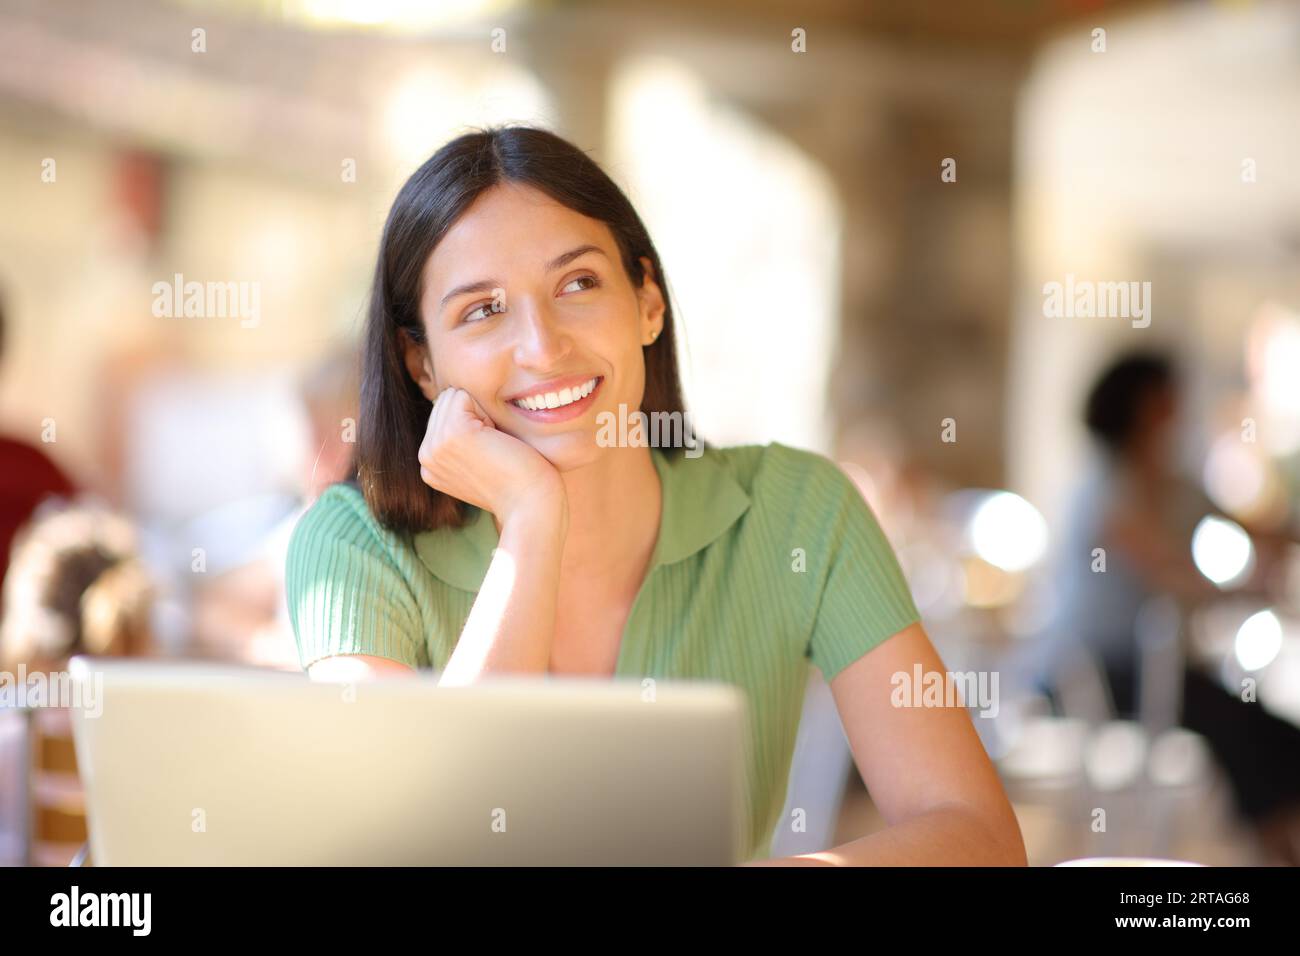 Happy woman with laptop thinking in a restaurant terrace looking at side Stock Photo